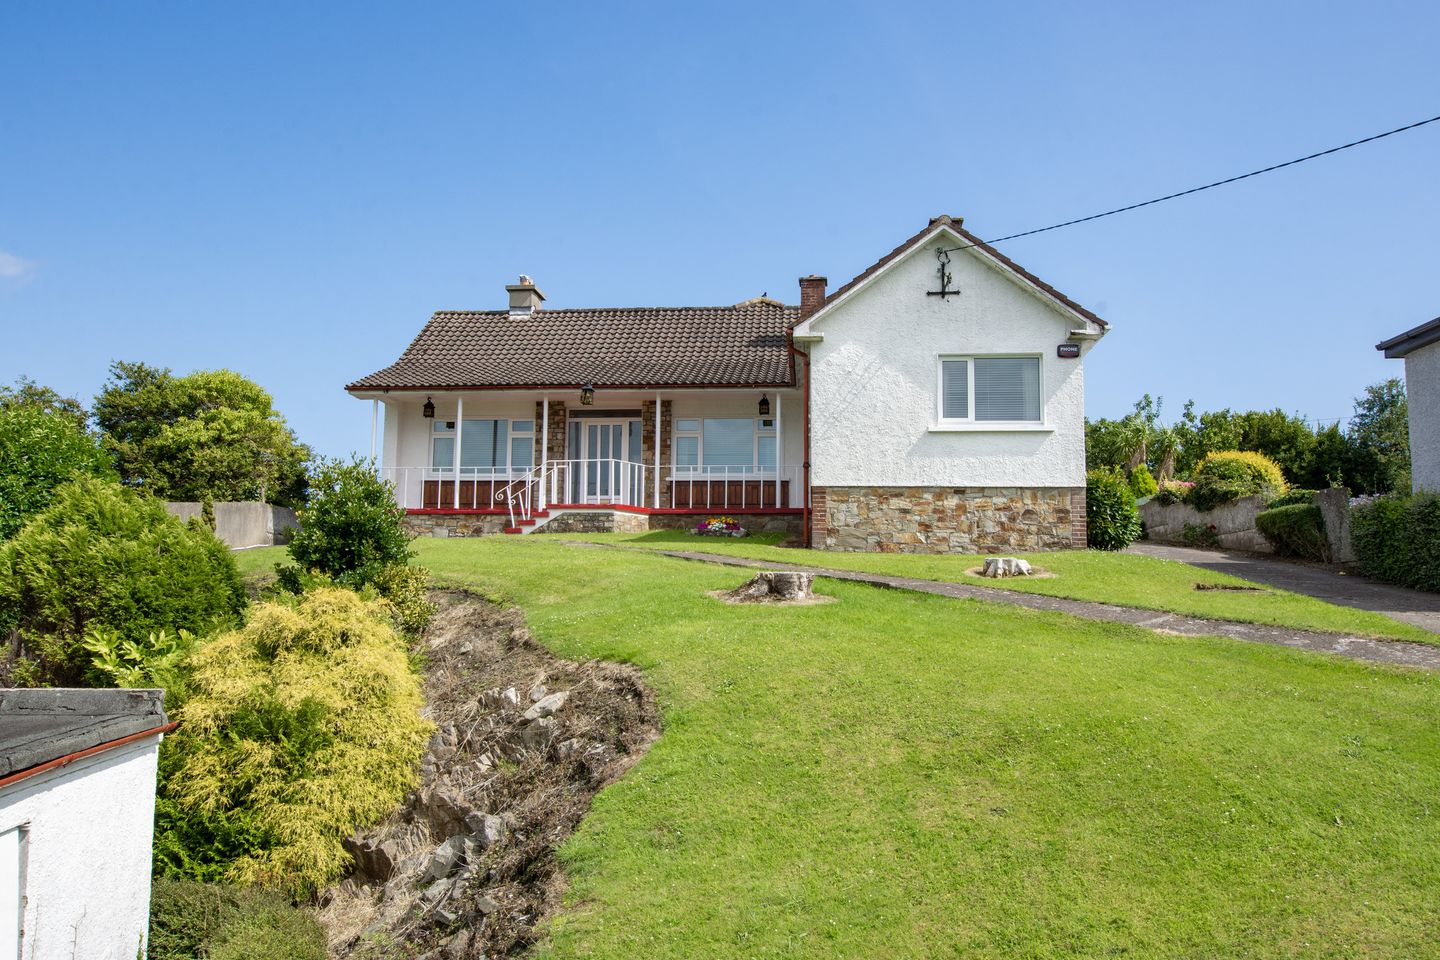 Santa Maria, Hillside Grove, Dunmore Road, Waterford City, Co. Waterford, X91D85T